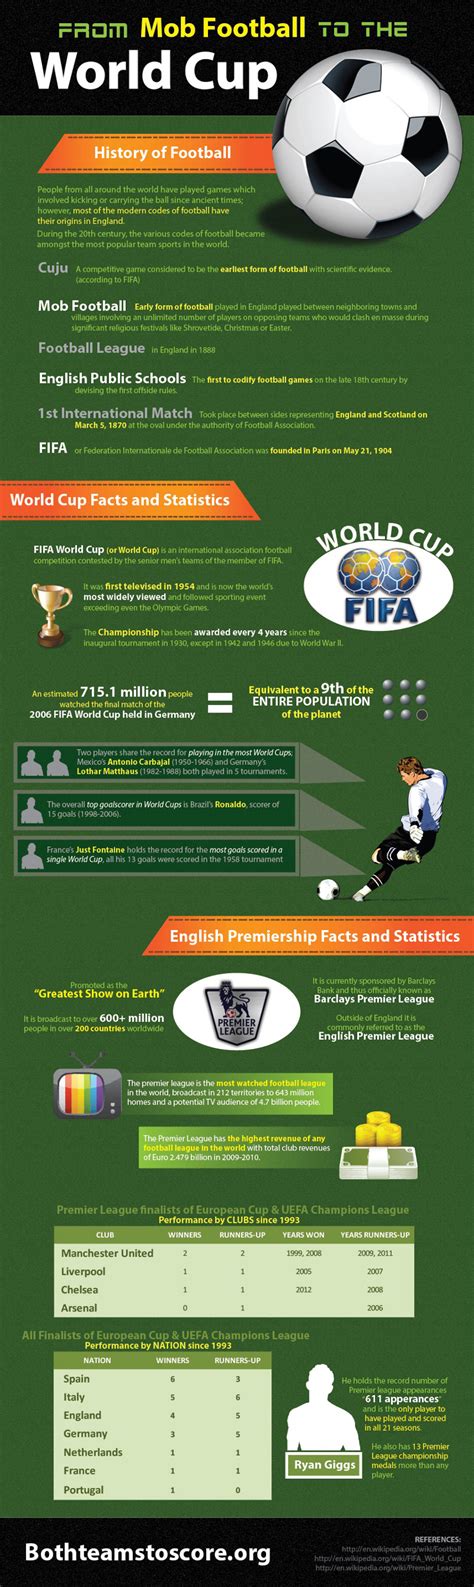 List Of 125 Catchy Soccer Slogans And Taglines